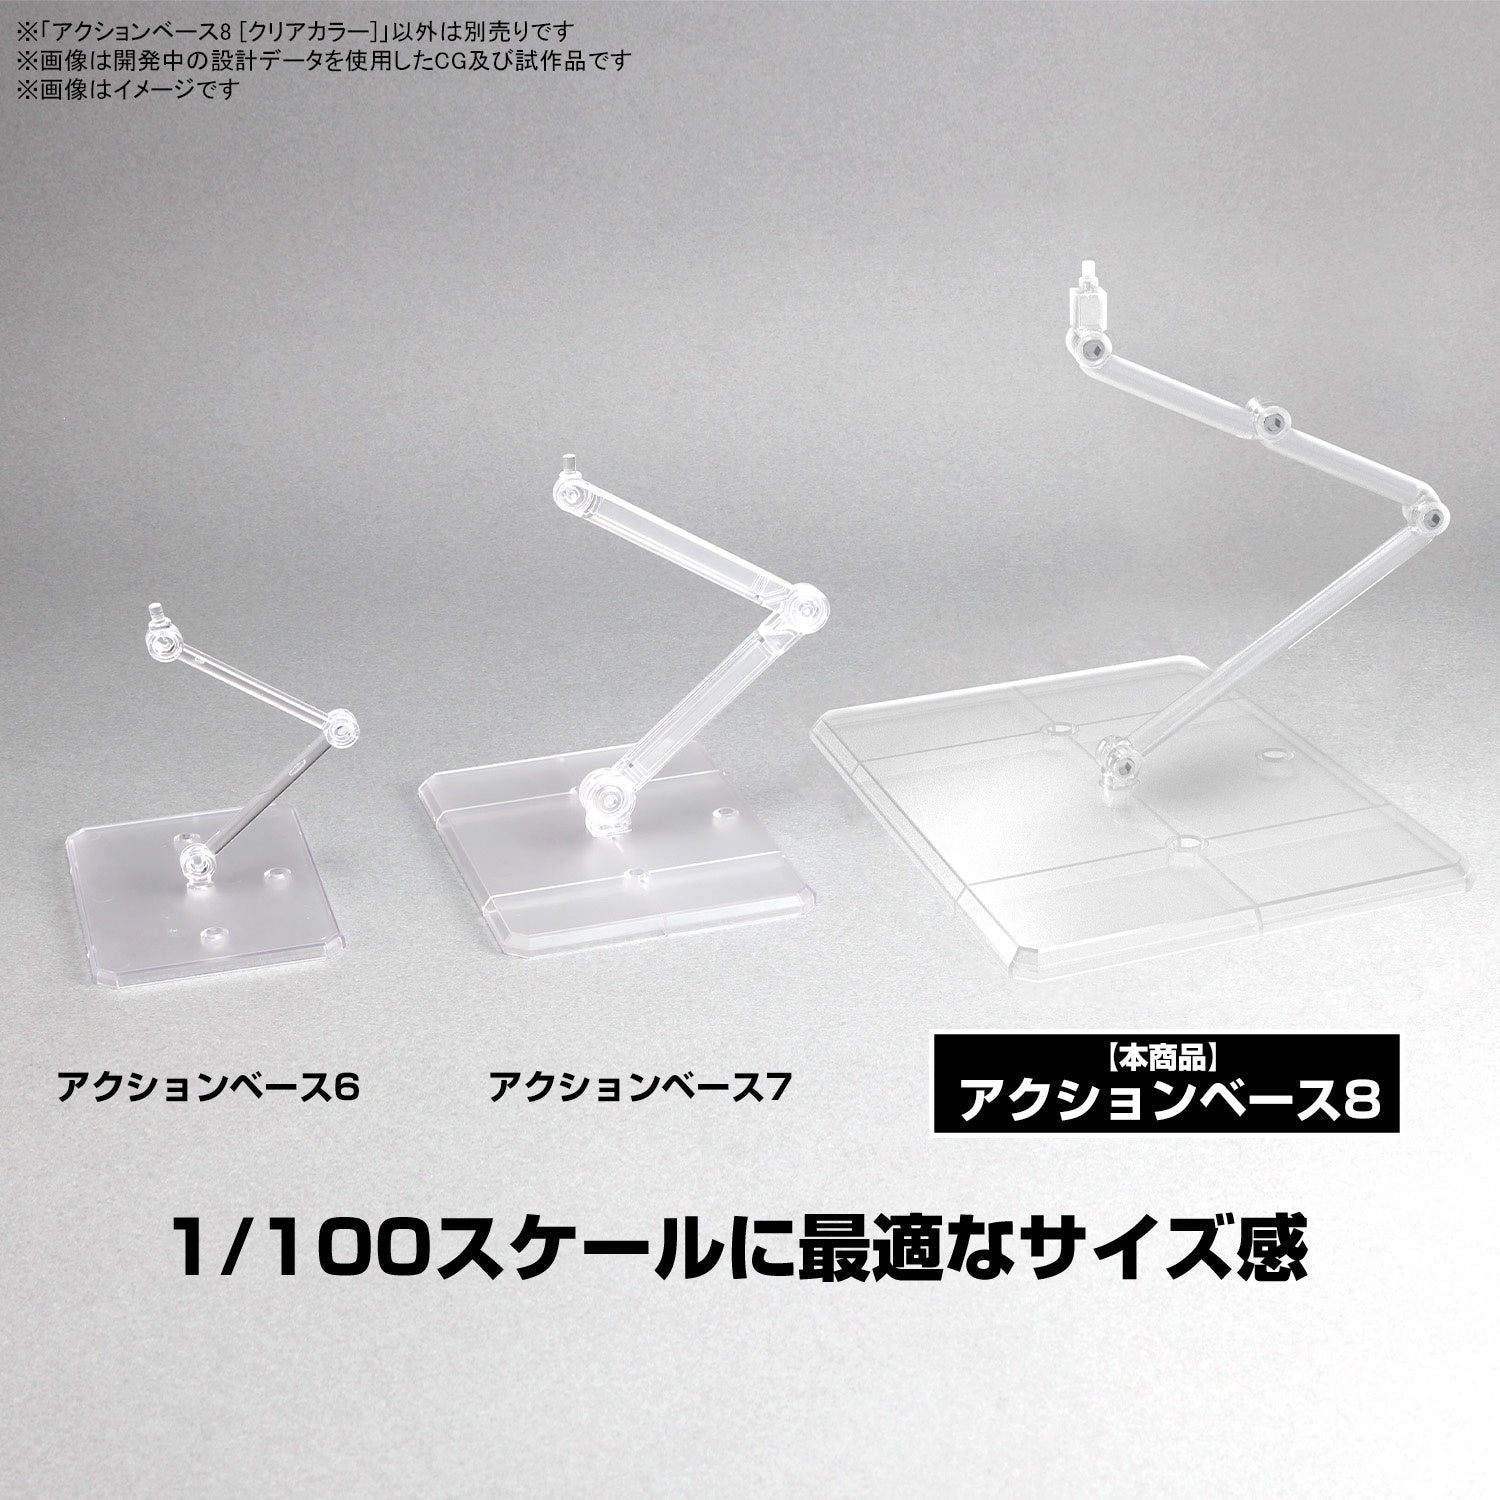 ACTION BASE 8 - (CLEAR COLOR) **PRE-ORDER**